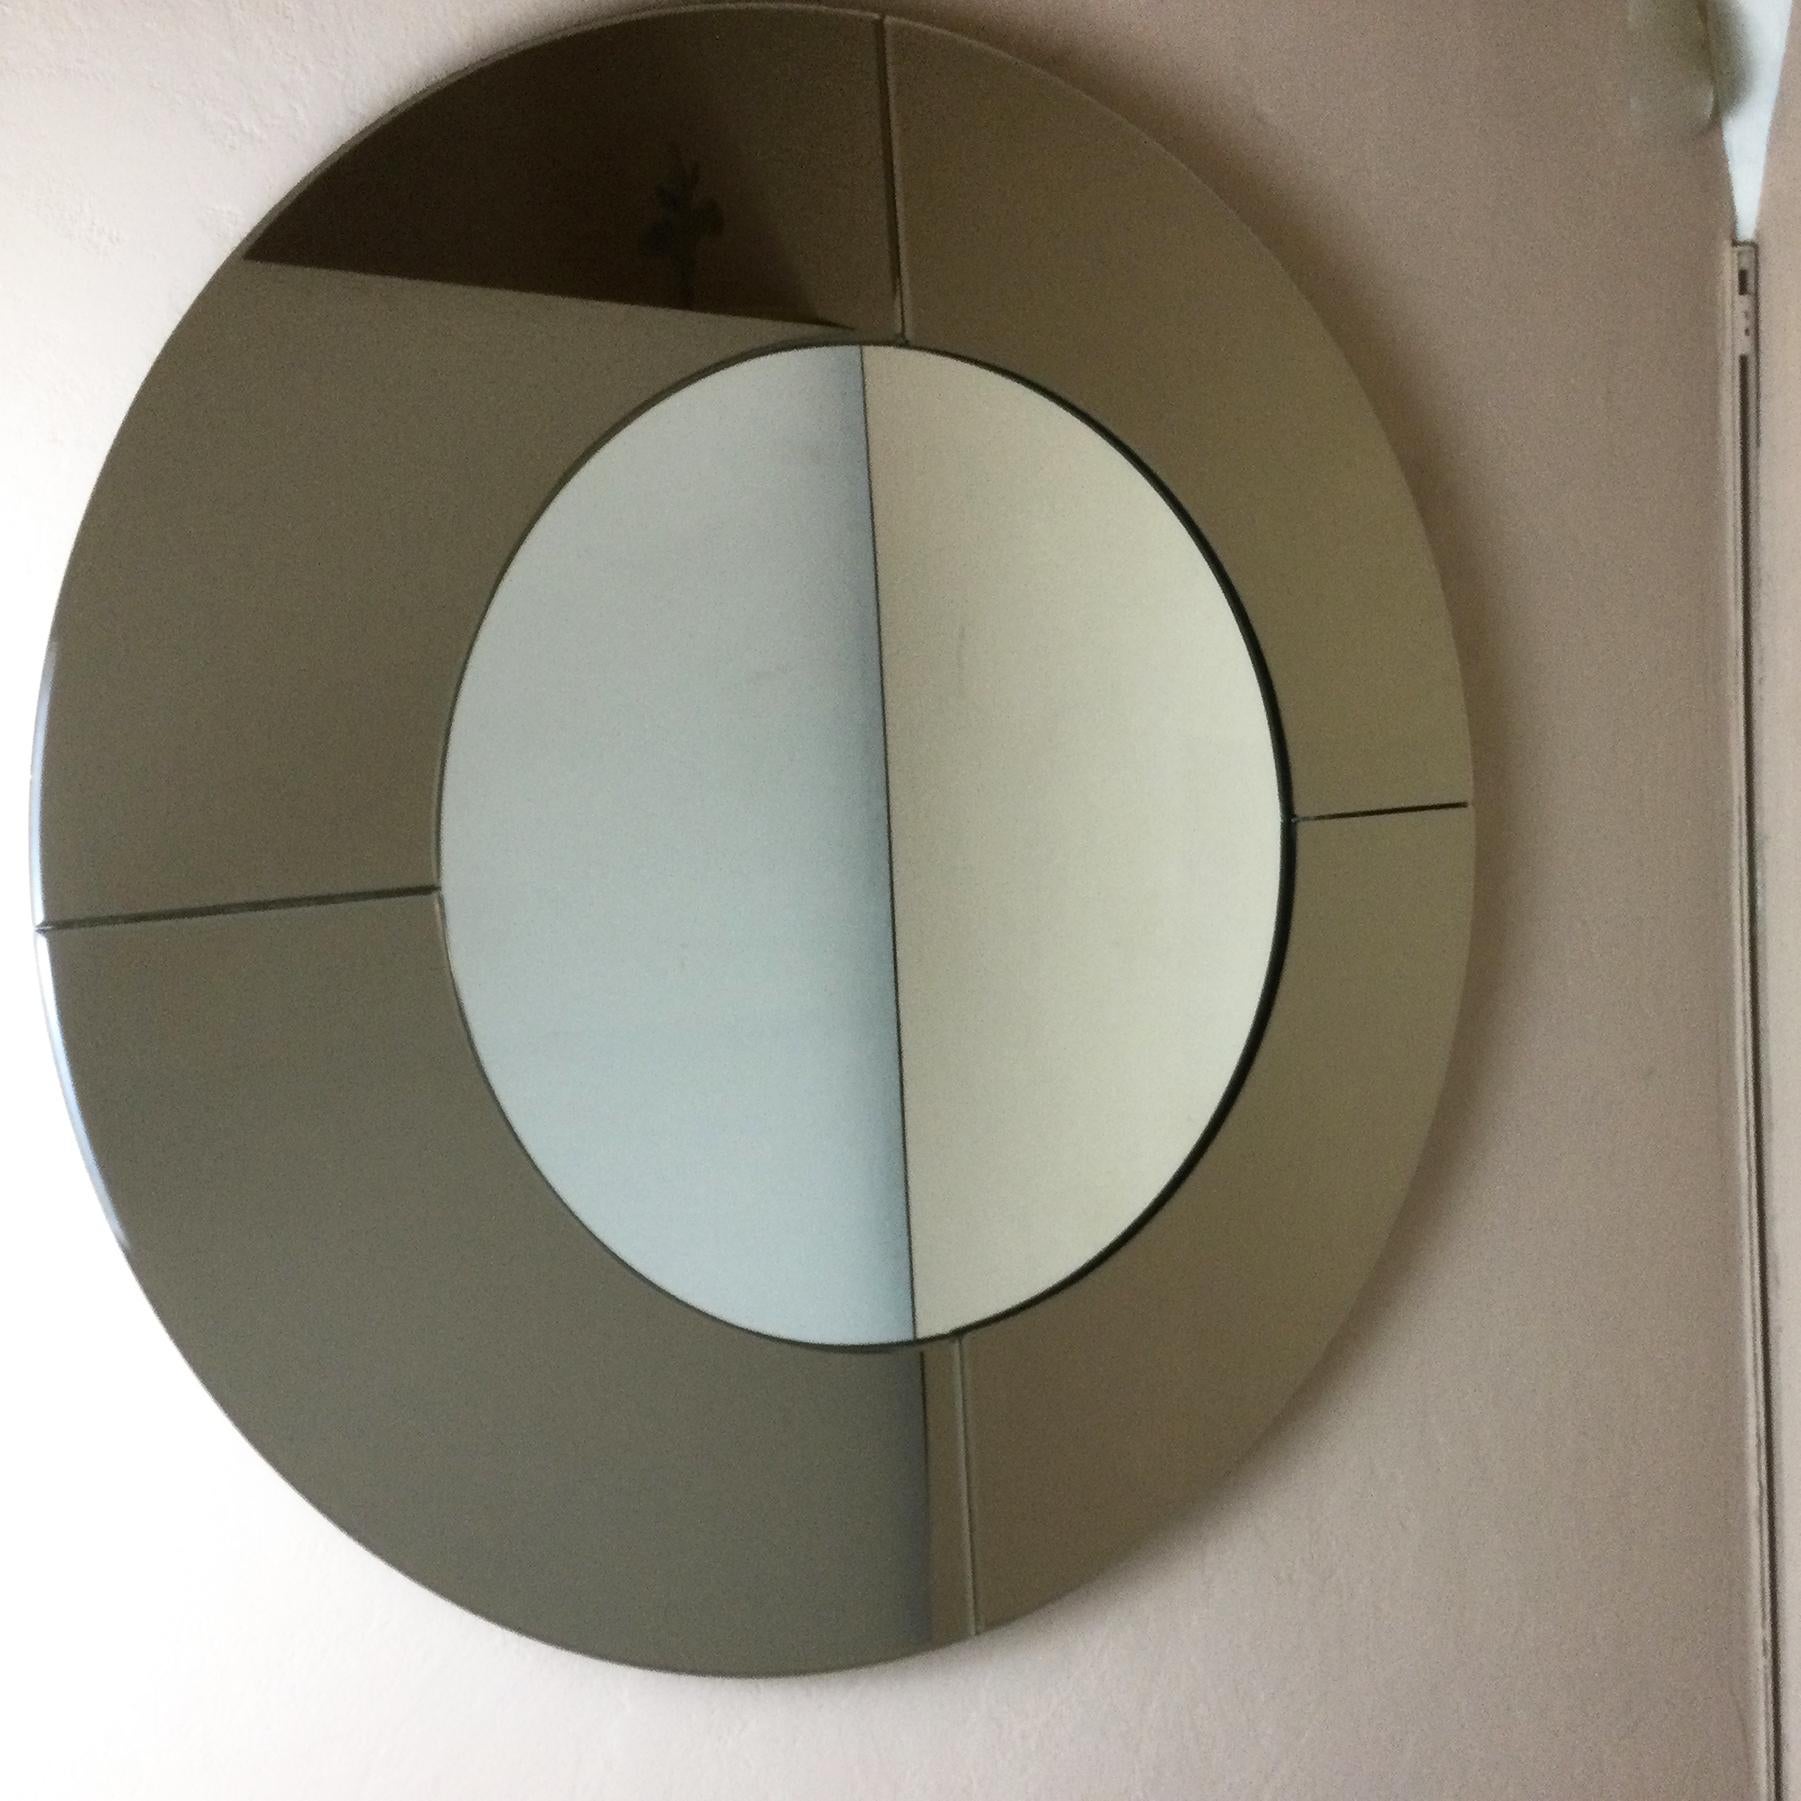 Generously sized mirror, Italian production from the late 1960s.